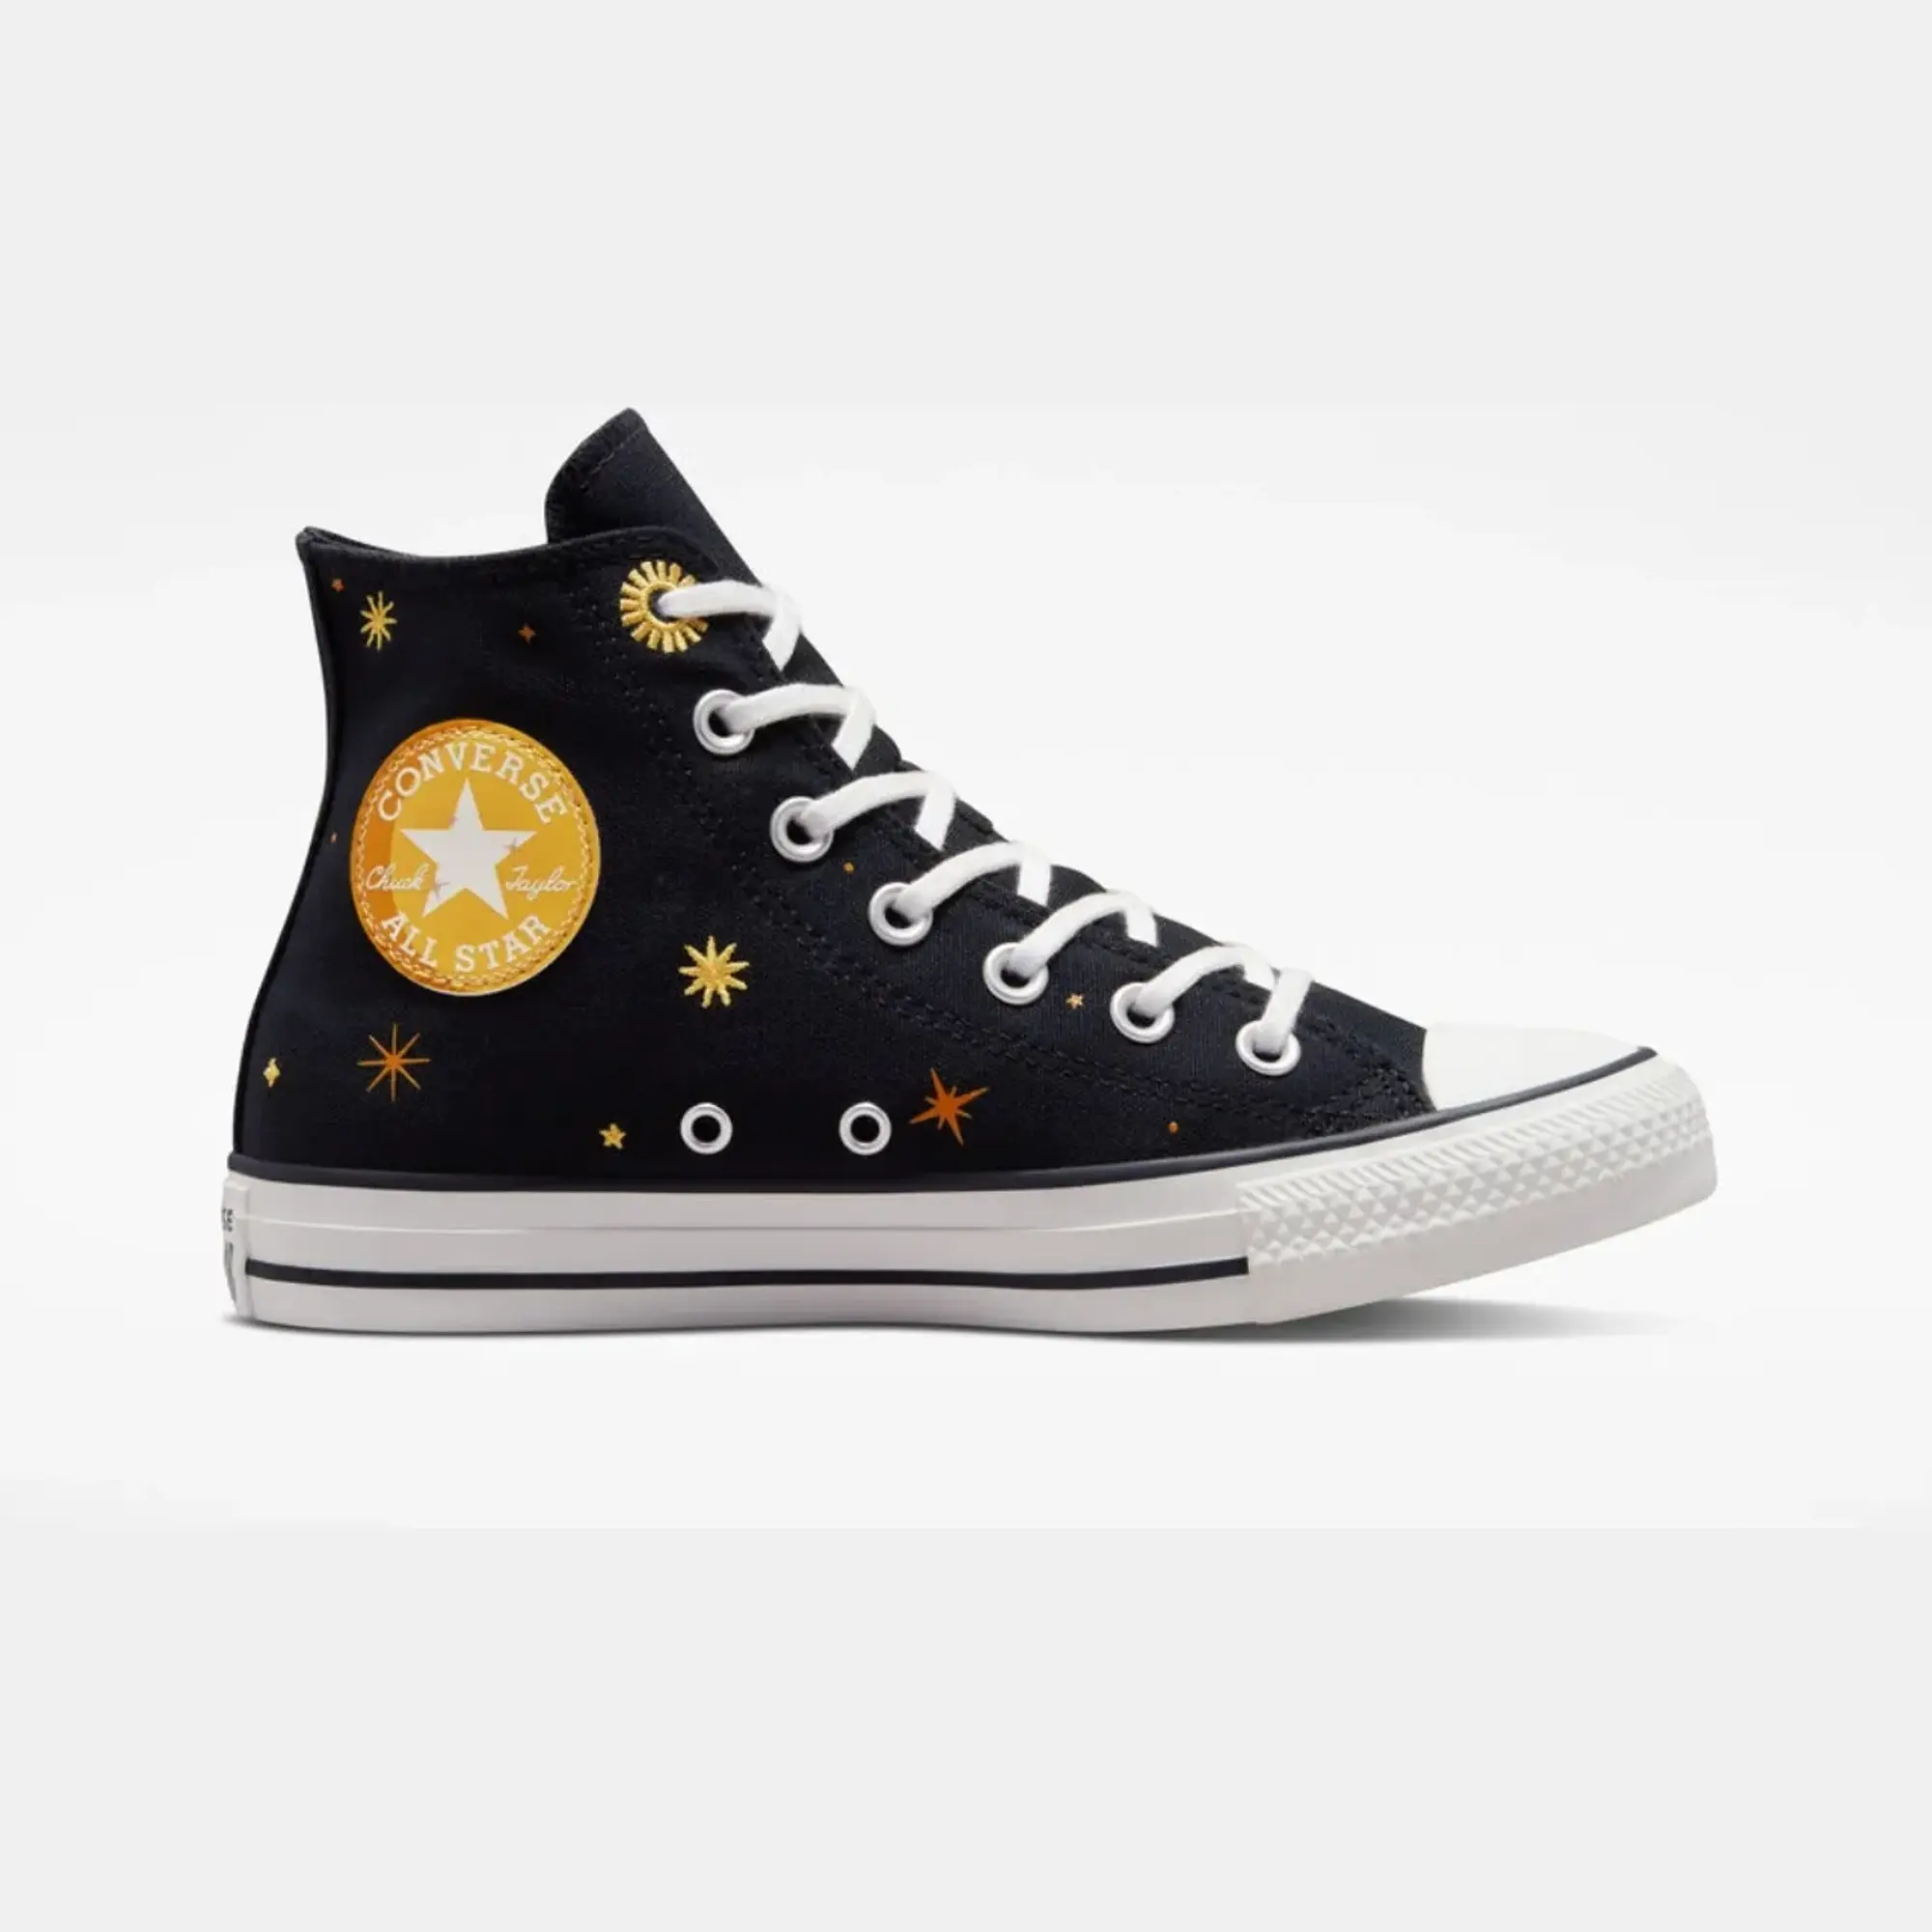 Converse all star hi timeless trainers in black & gold